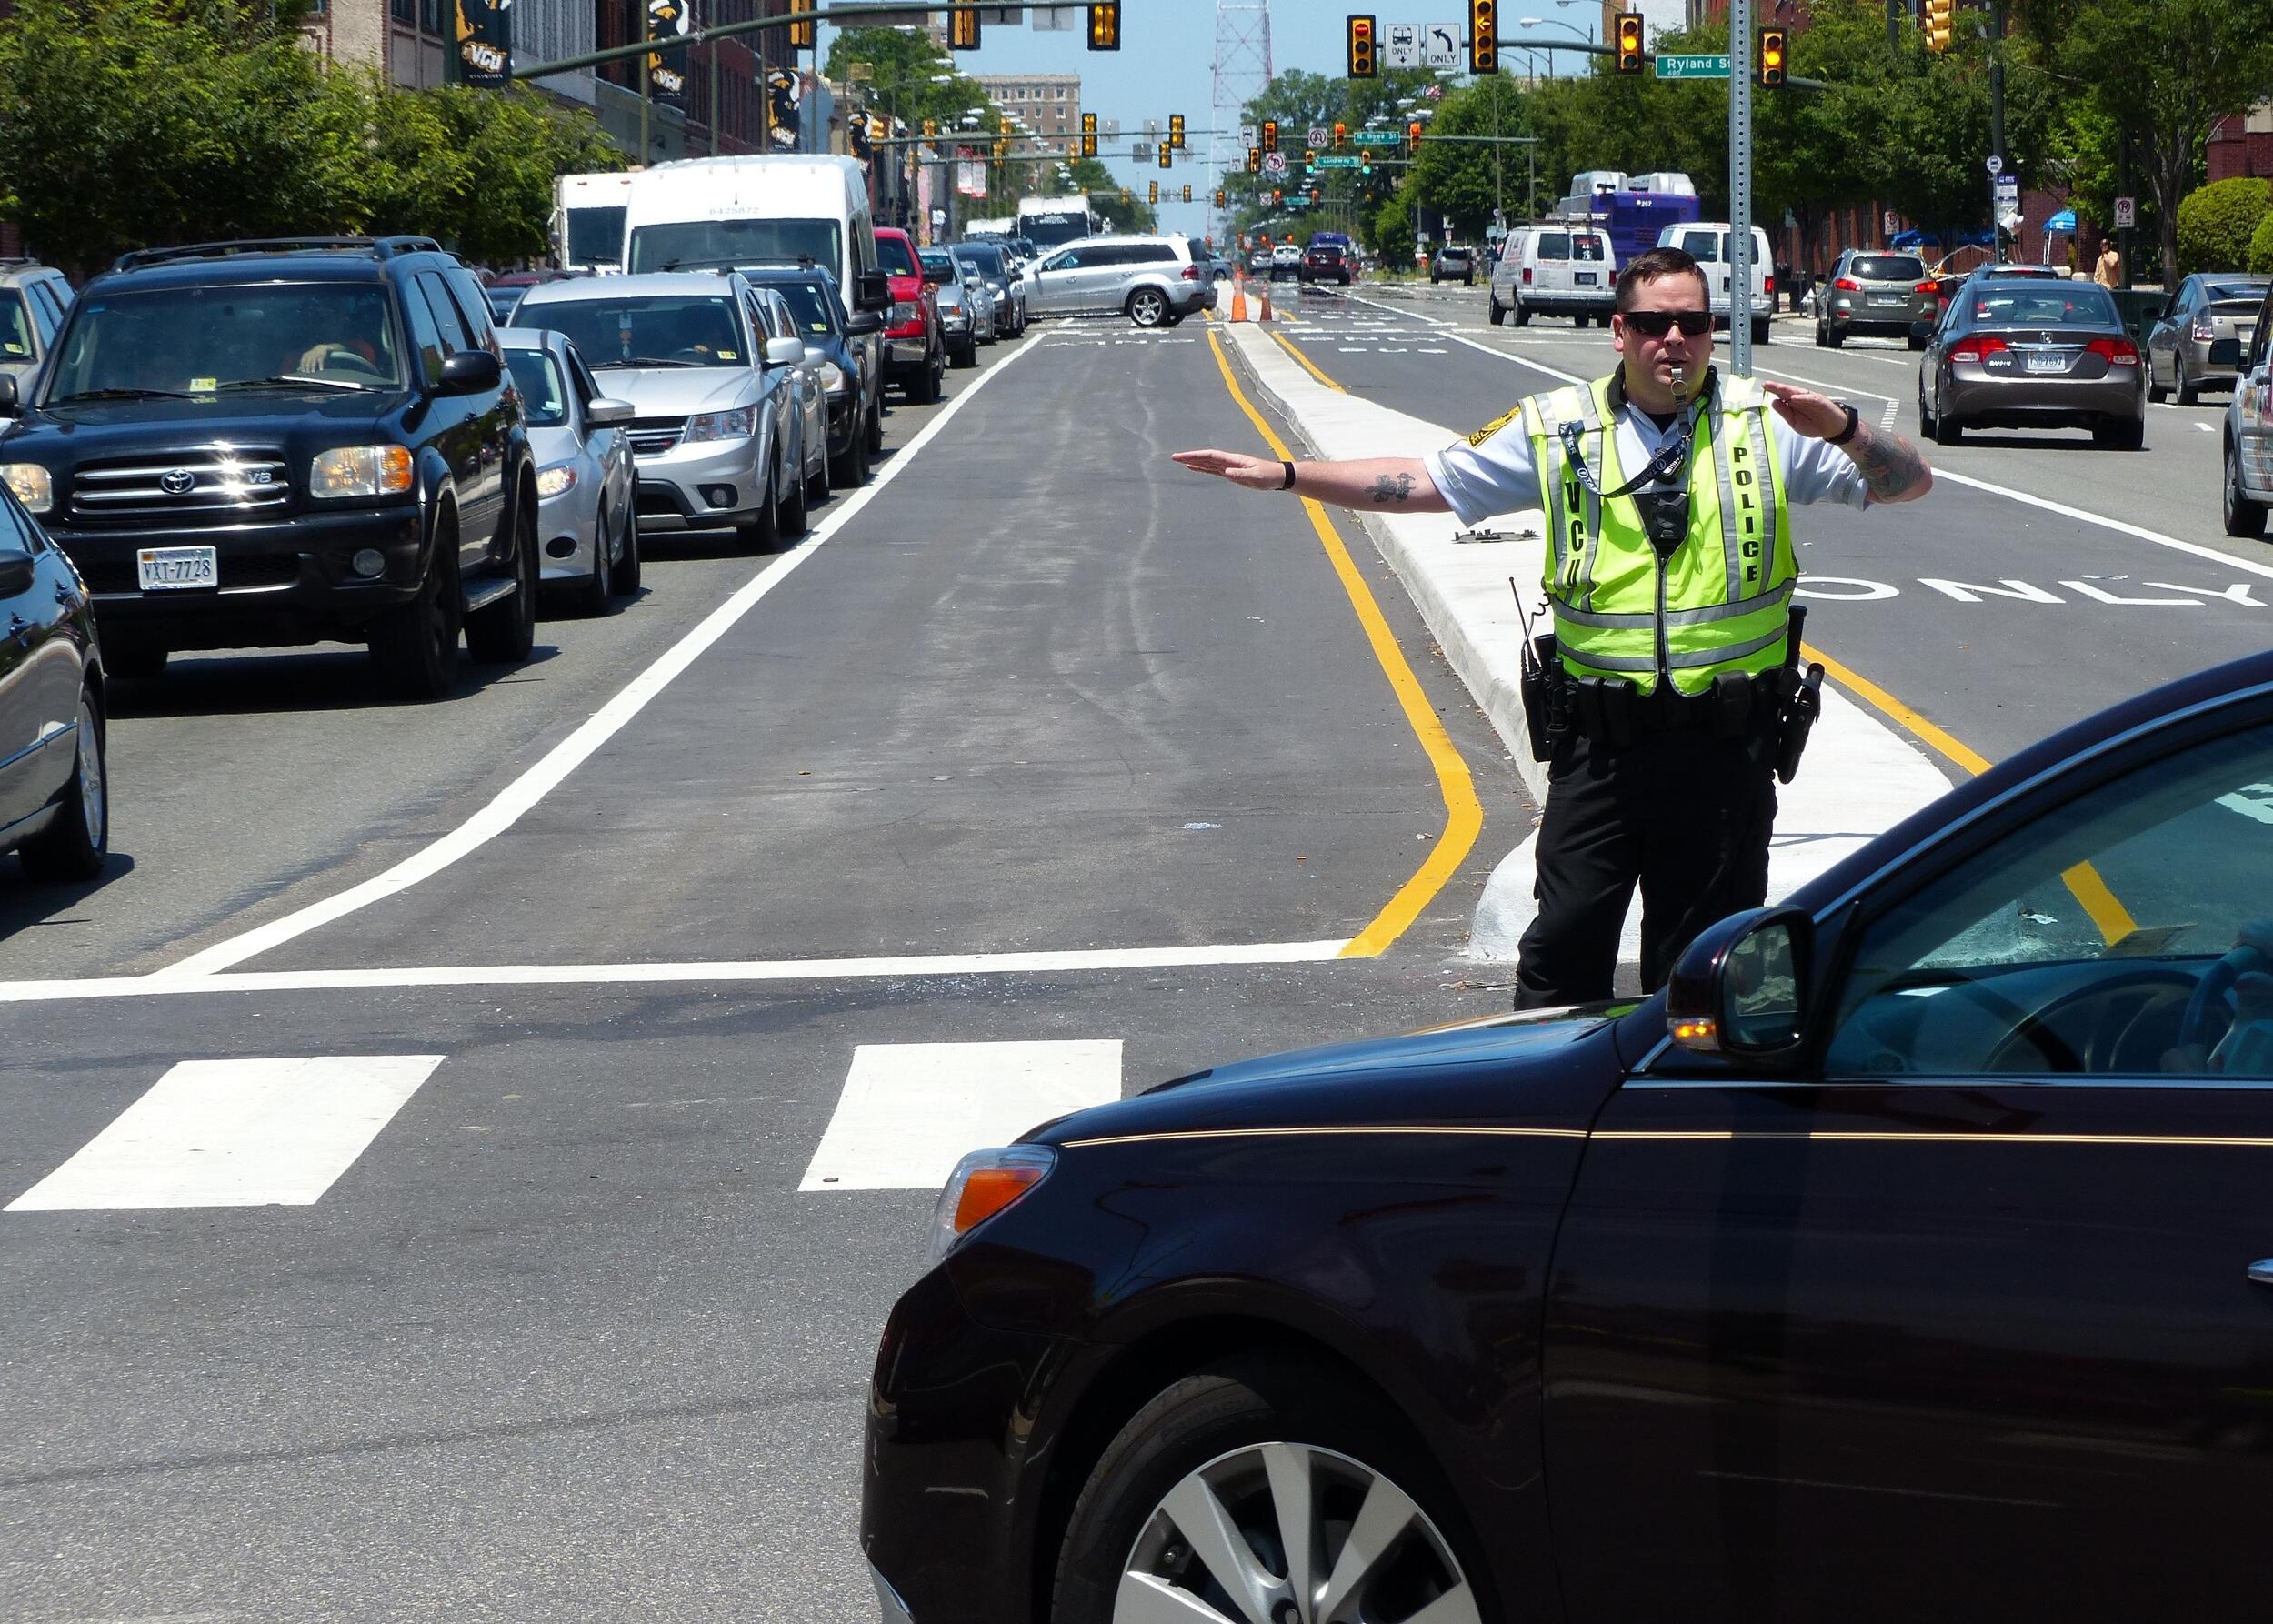 An officer in a yellow vest directs traffic.